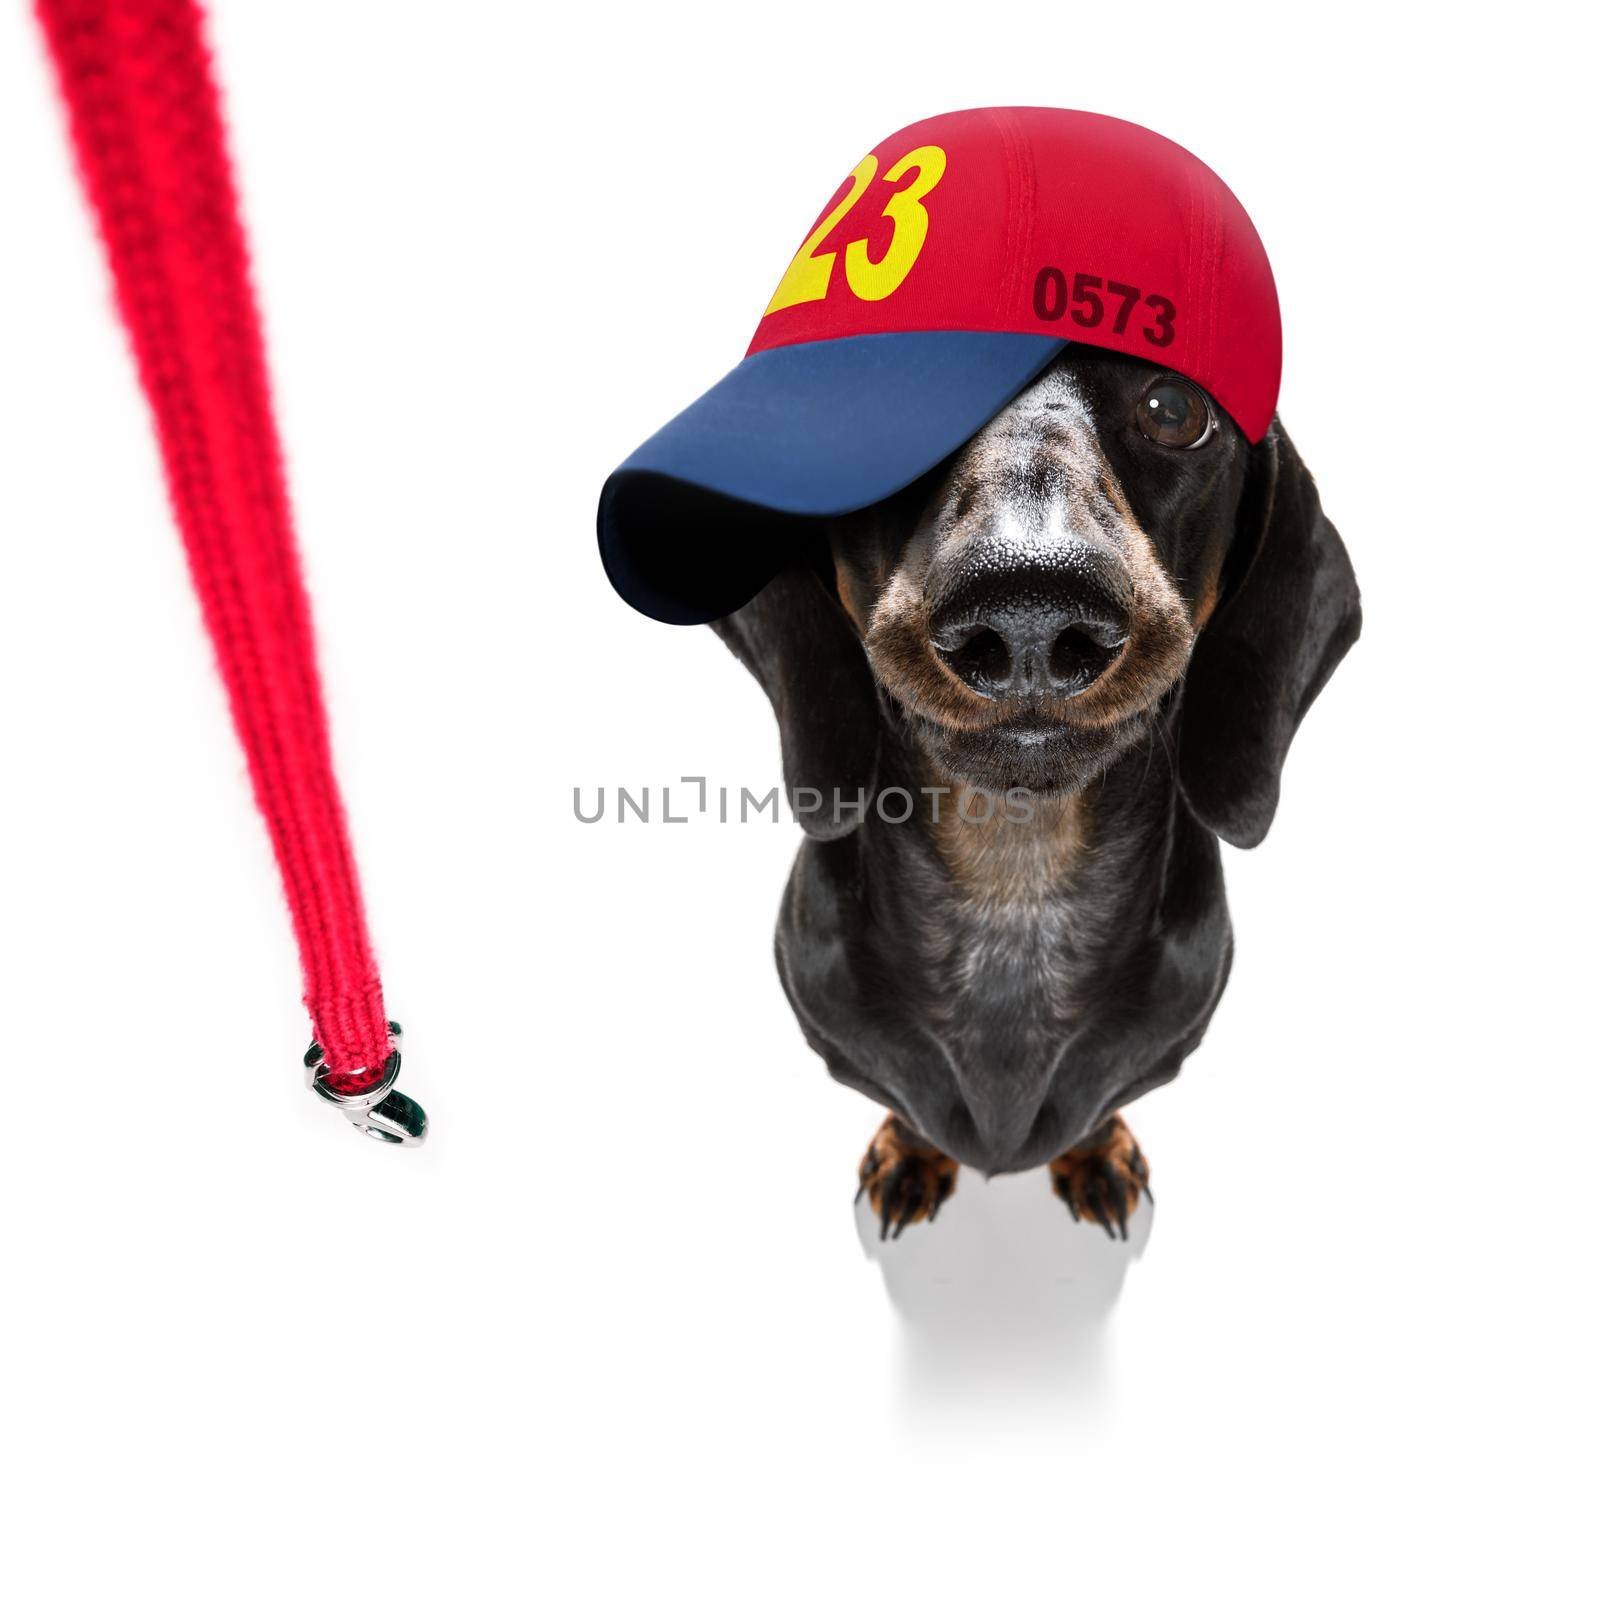 cool casual look dachshund dog wearing a baseball cap or hat , sporty and fit ,ready to walk with leash